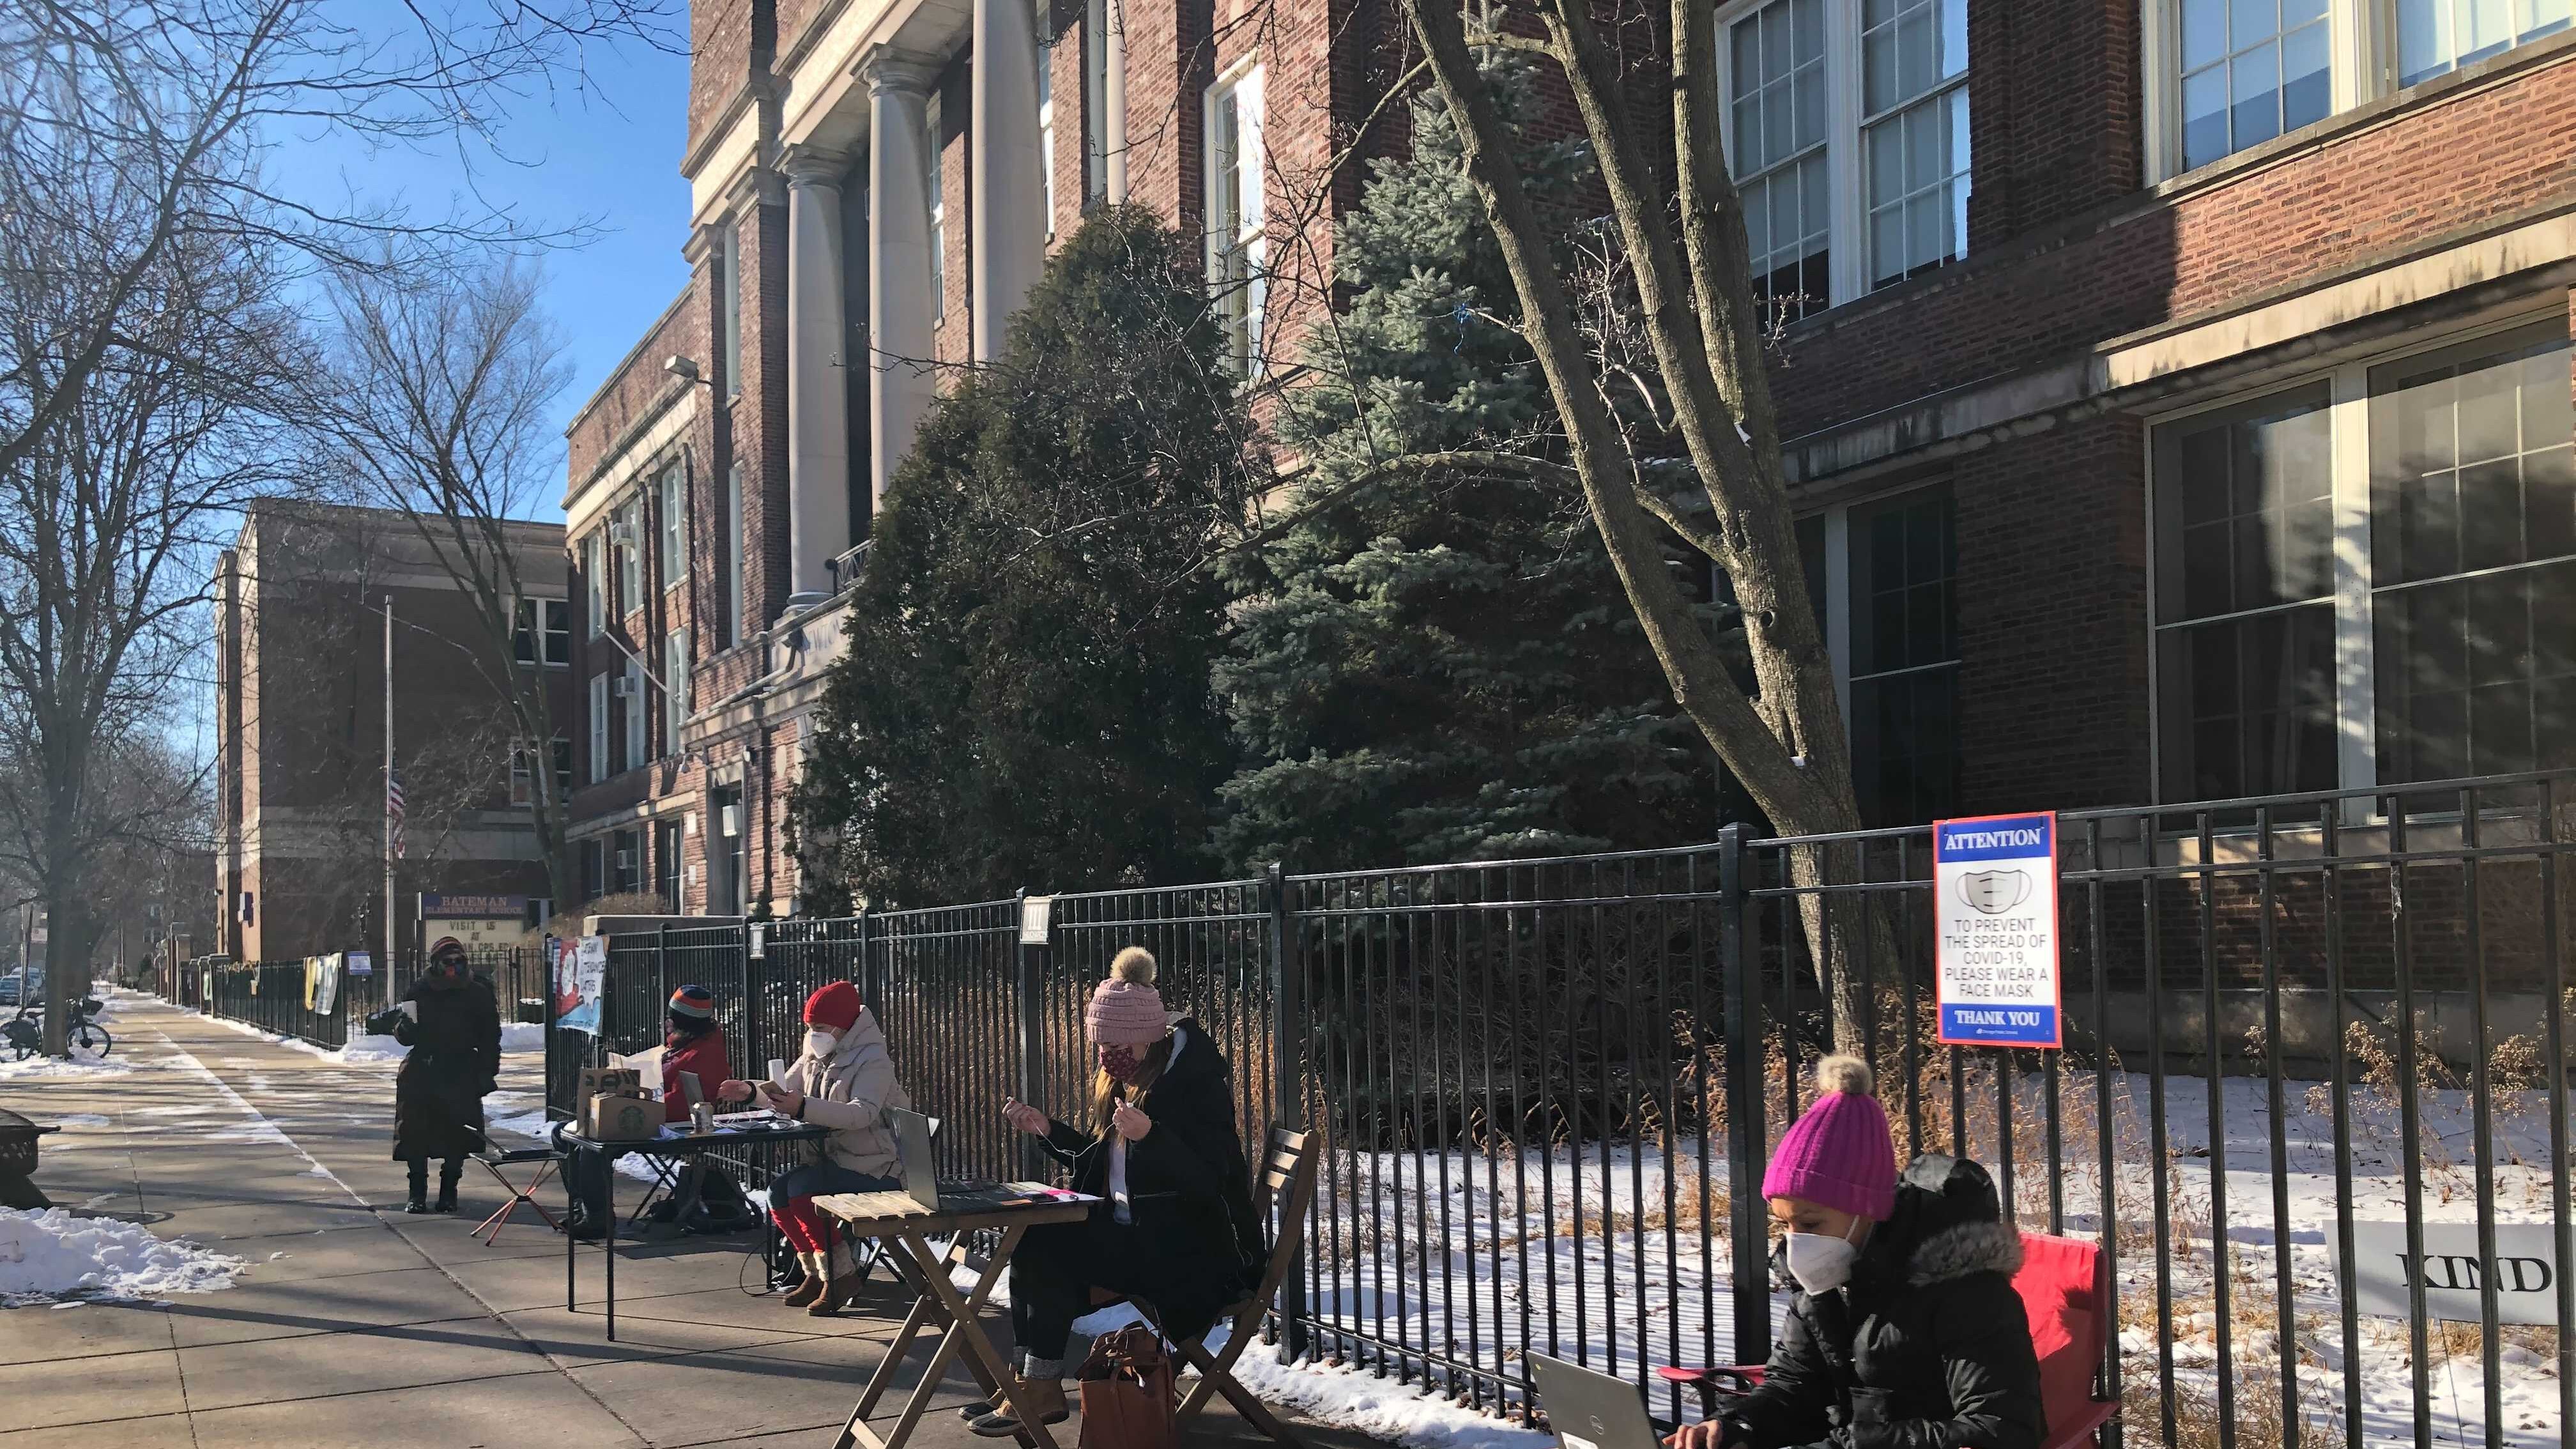 Educators at several Chicago schools, including Bateman Elementary, took their desks outdoors to teach remotely this week, as the union escalated efforts to push back on the city’s school reopening plan.